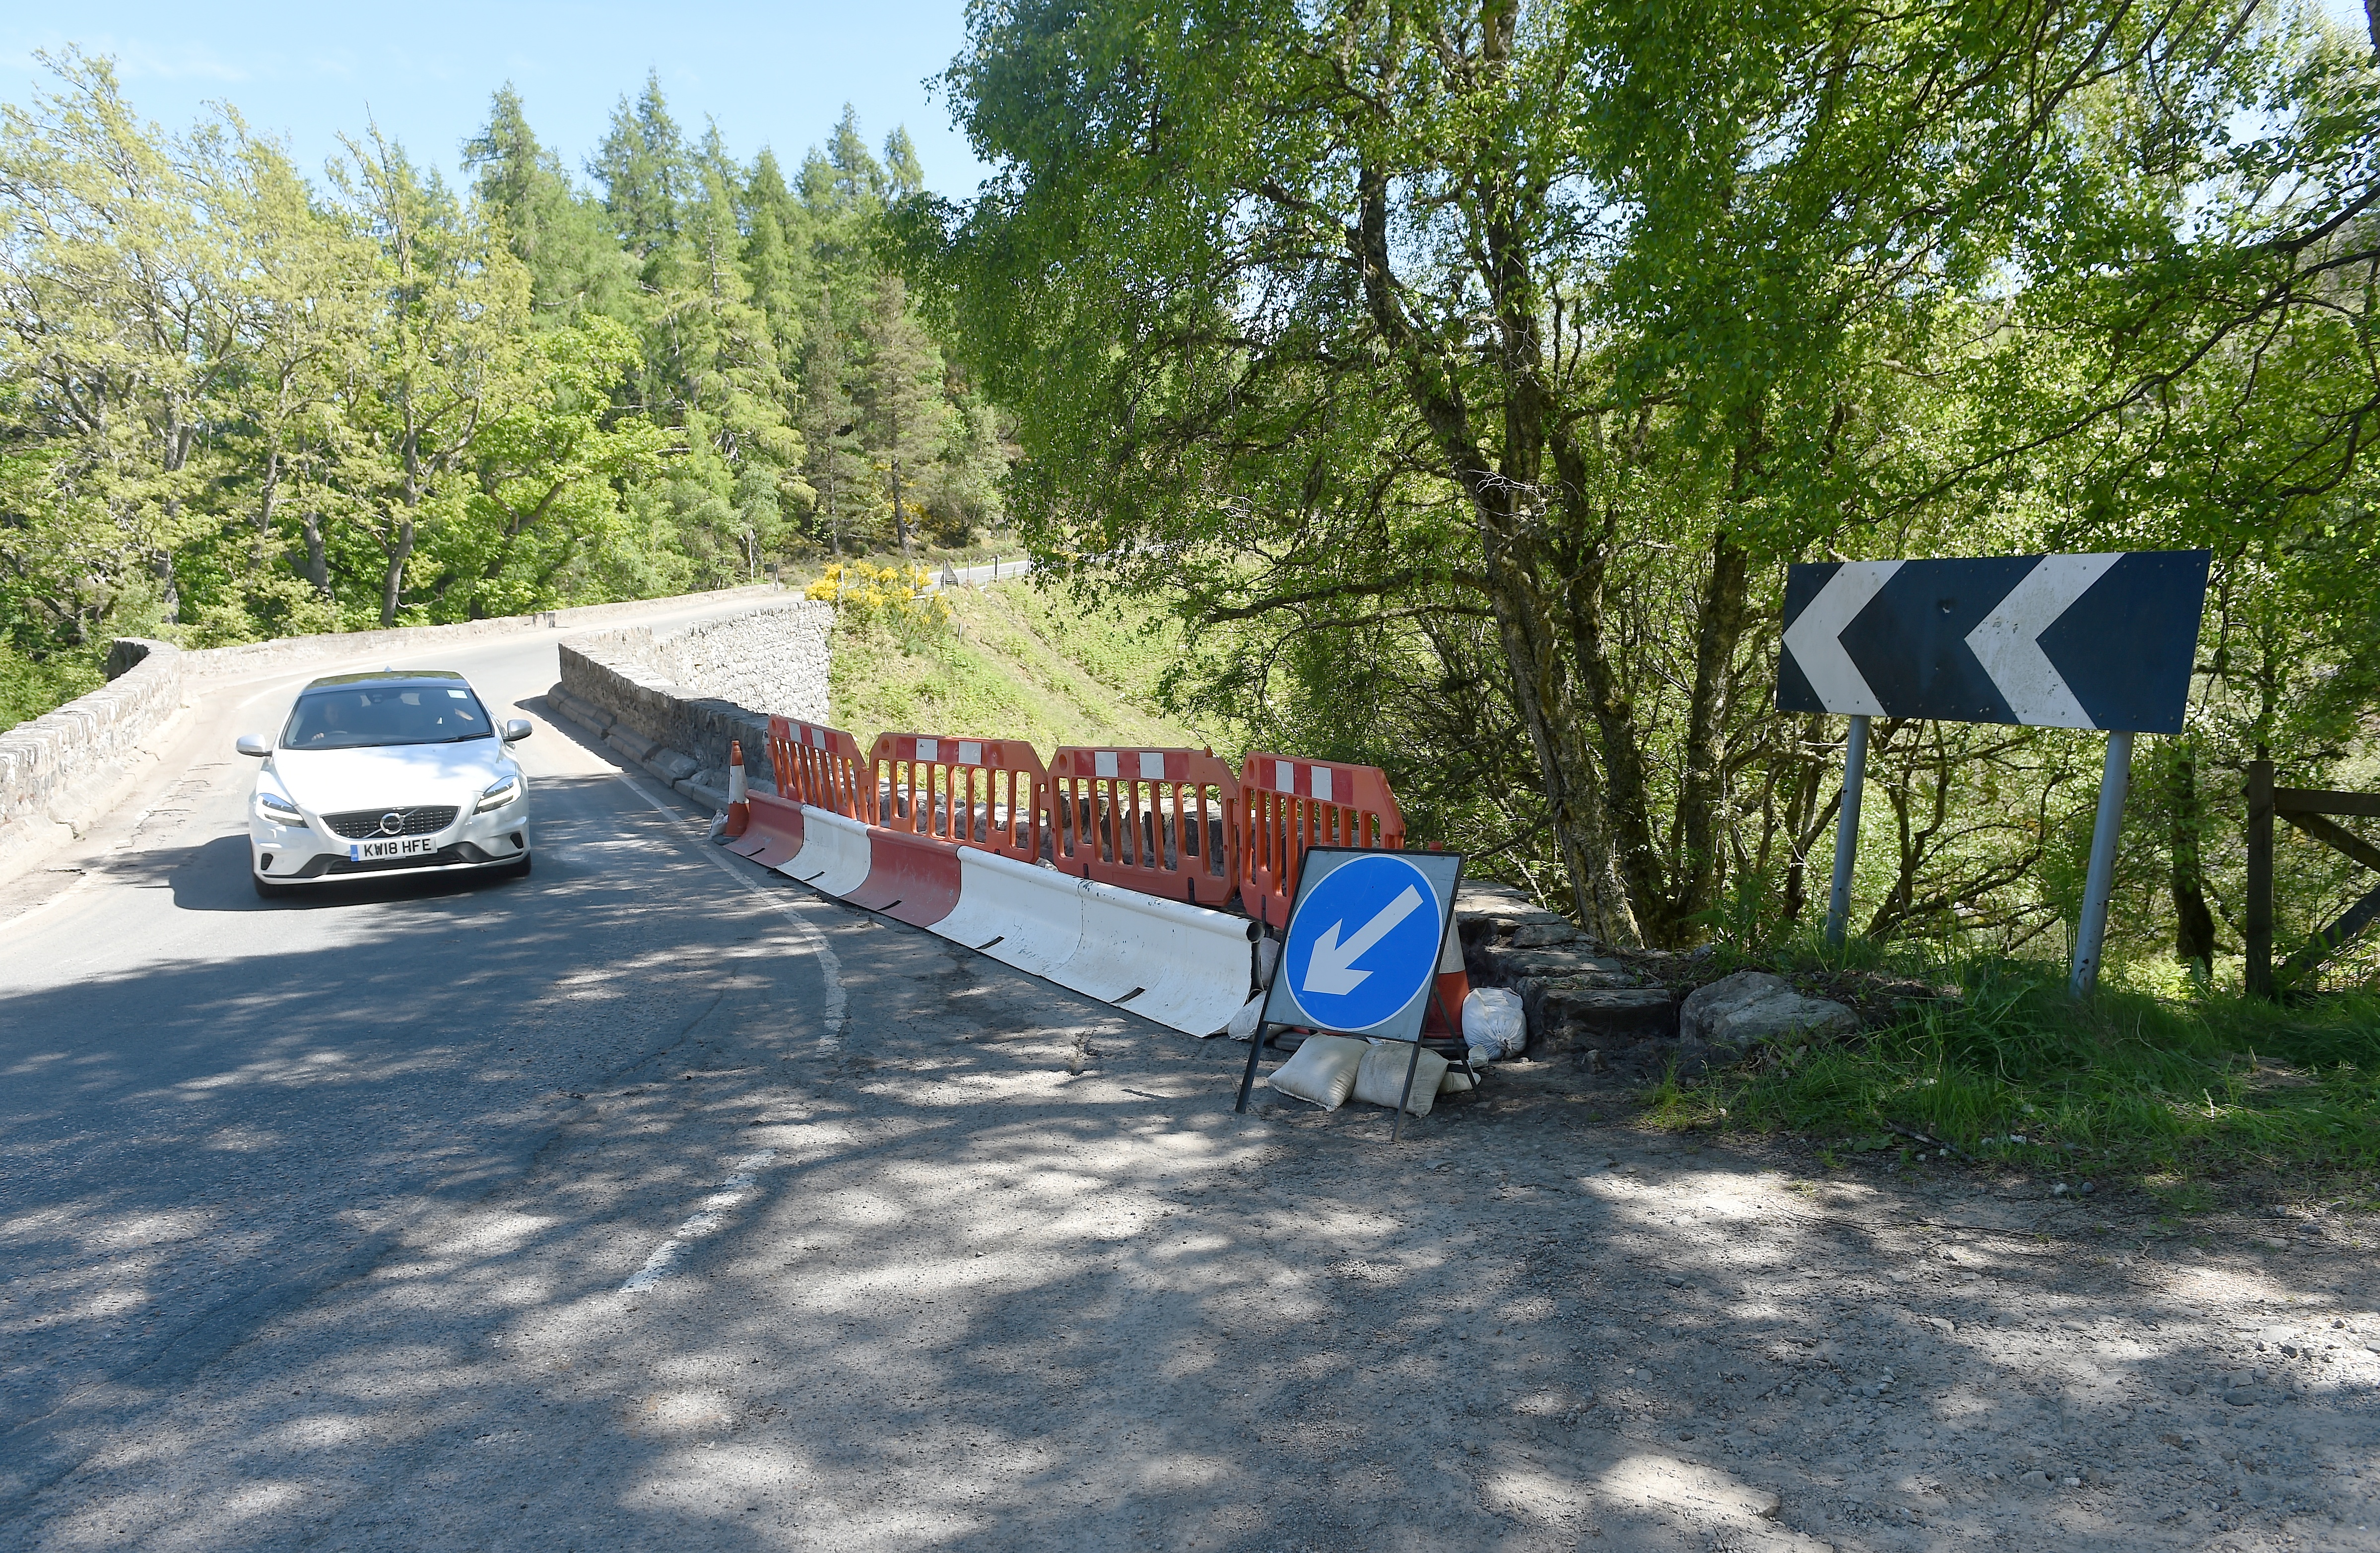 Bridge on the Struie in Ross-shire where Evan Cameron was killed after his vehicle went through the barrier.